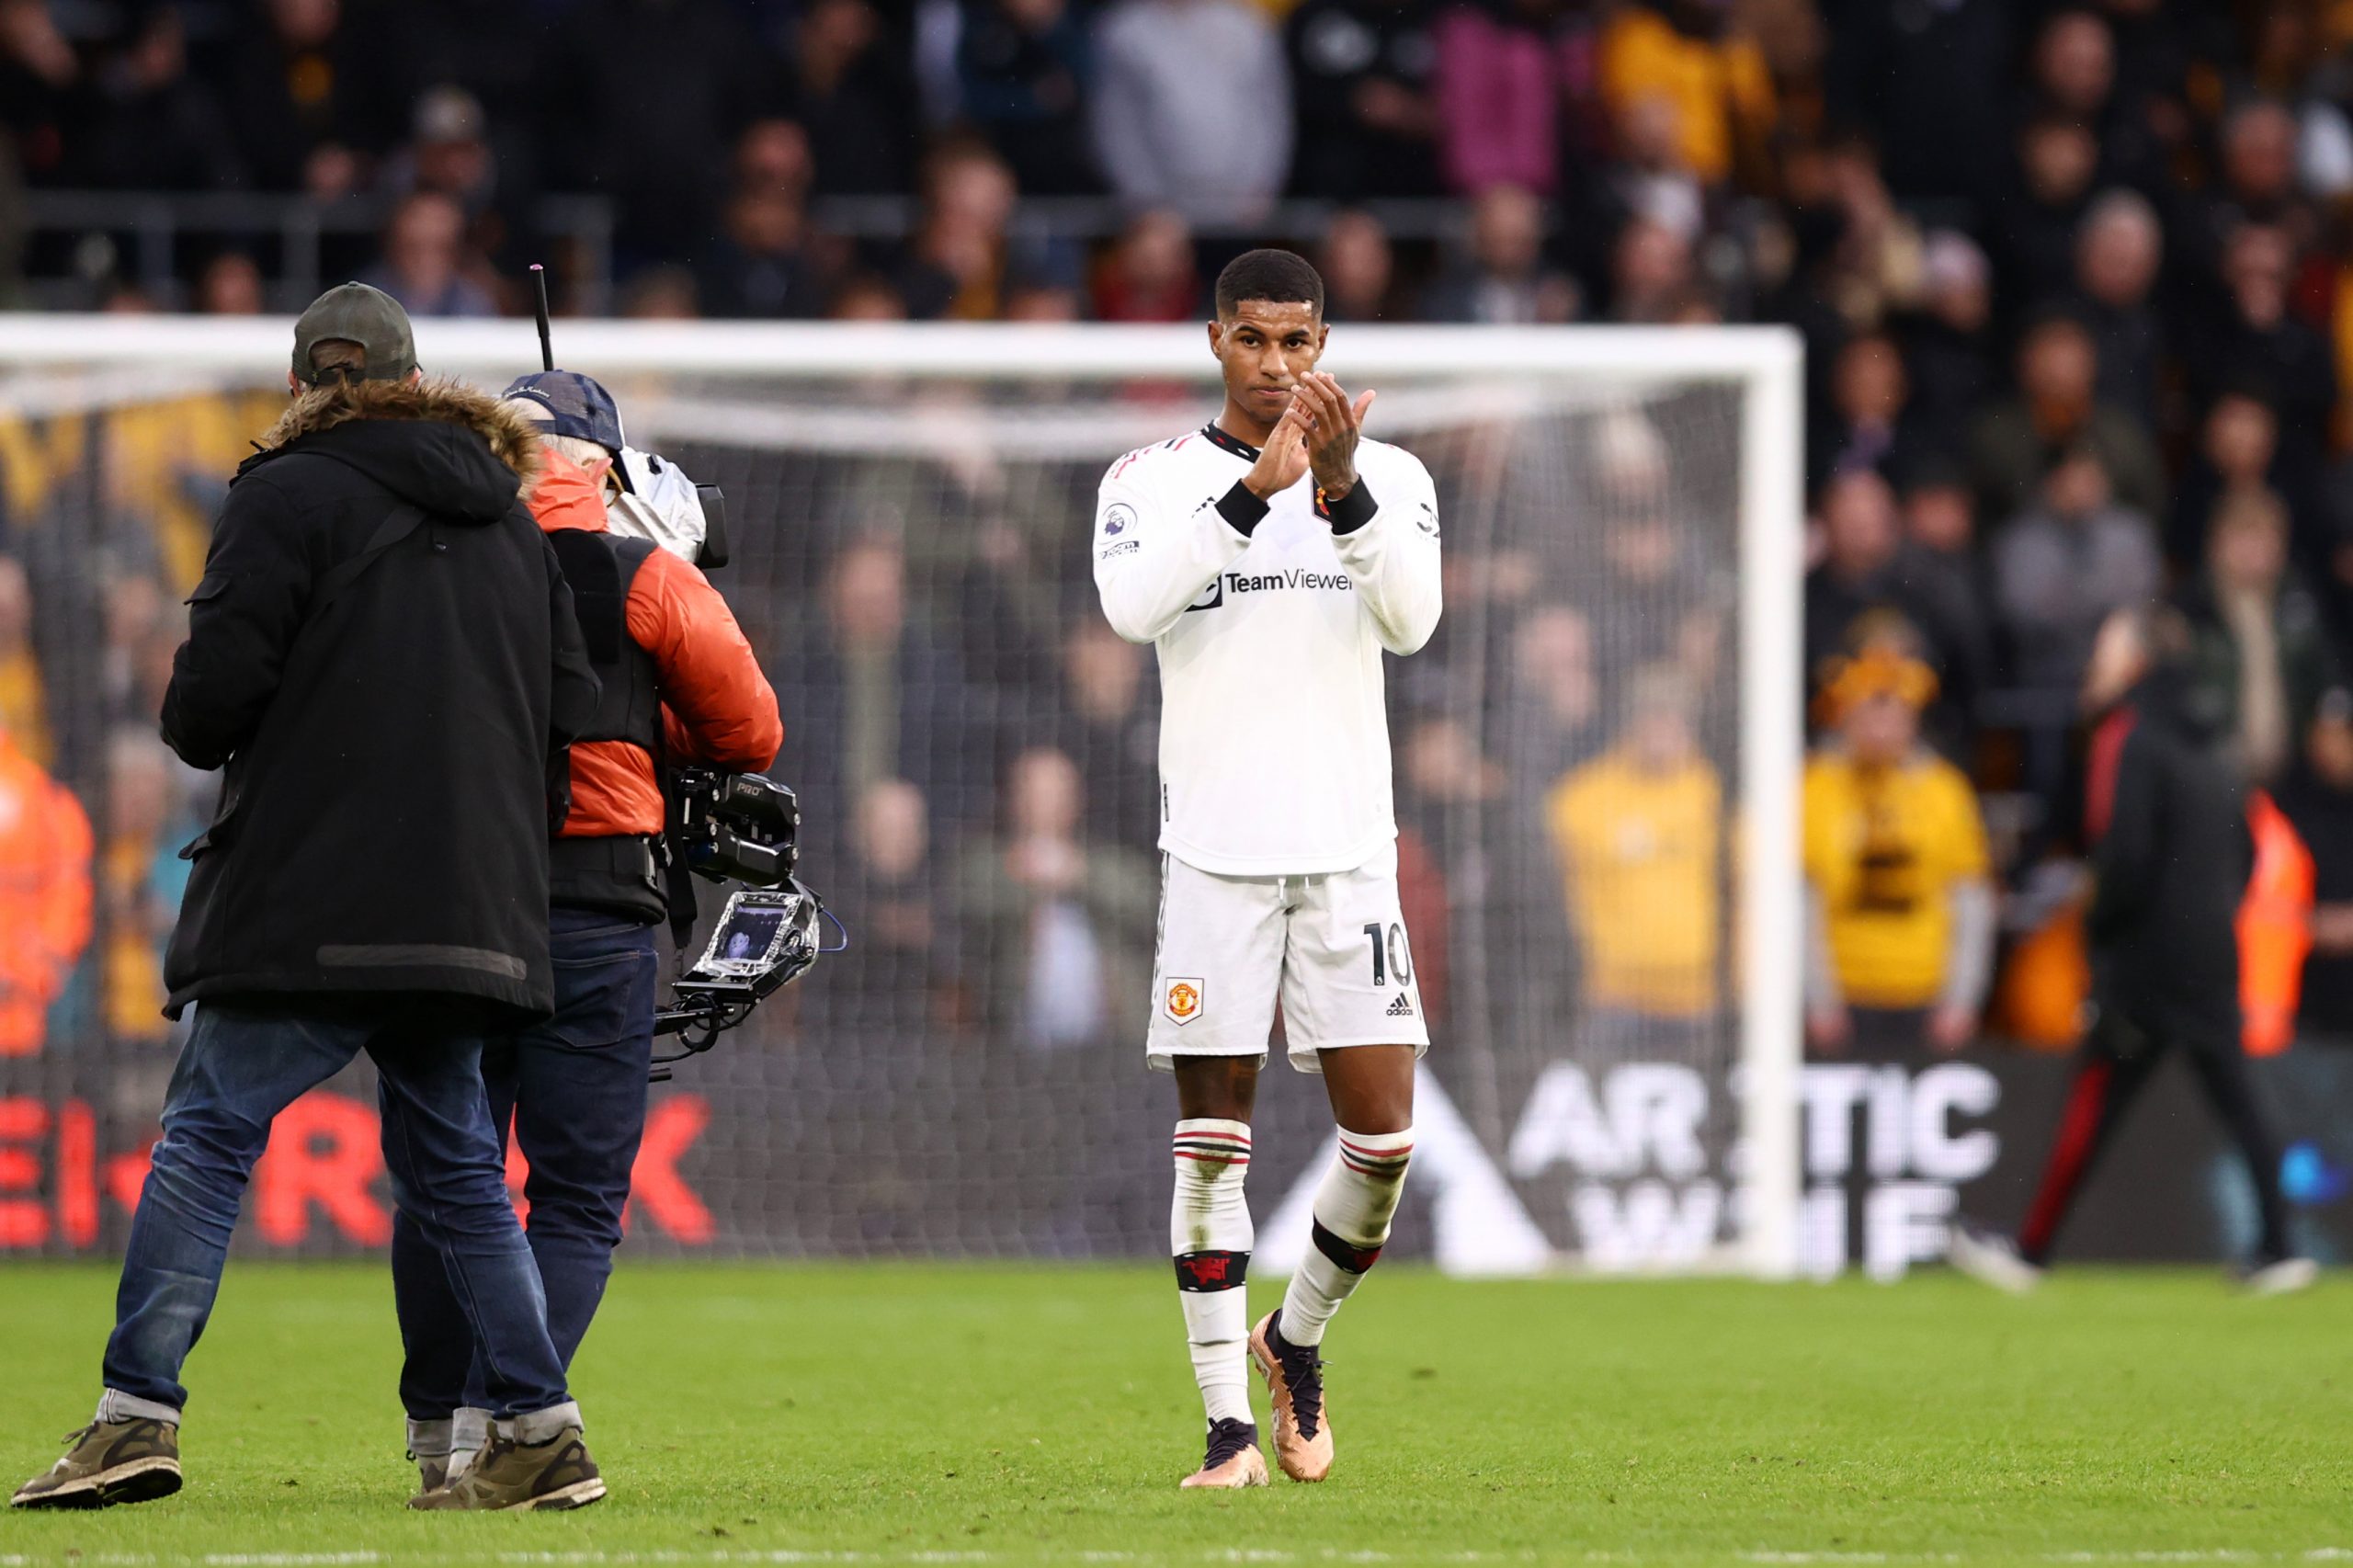 Marcus Rashford of Manchester United applauds their fans after the Premier League match between Wolverhampton Wanderers and Manchester United at Molineux on December 31, 2022 in Wolverhampton, England.